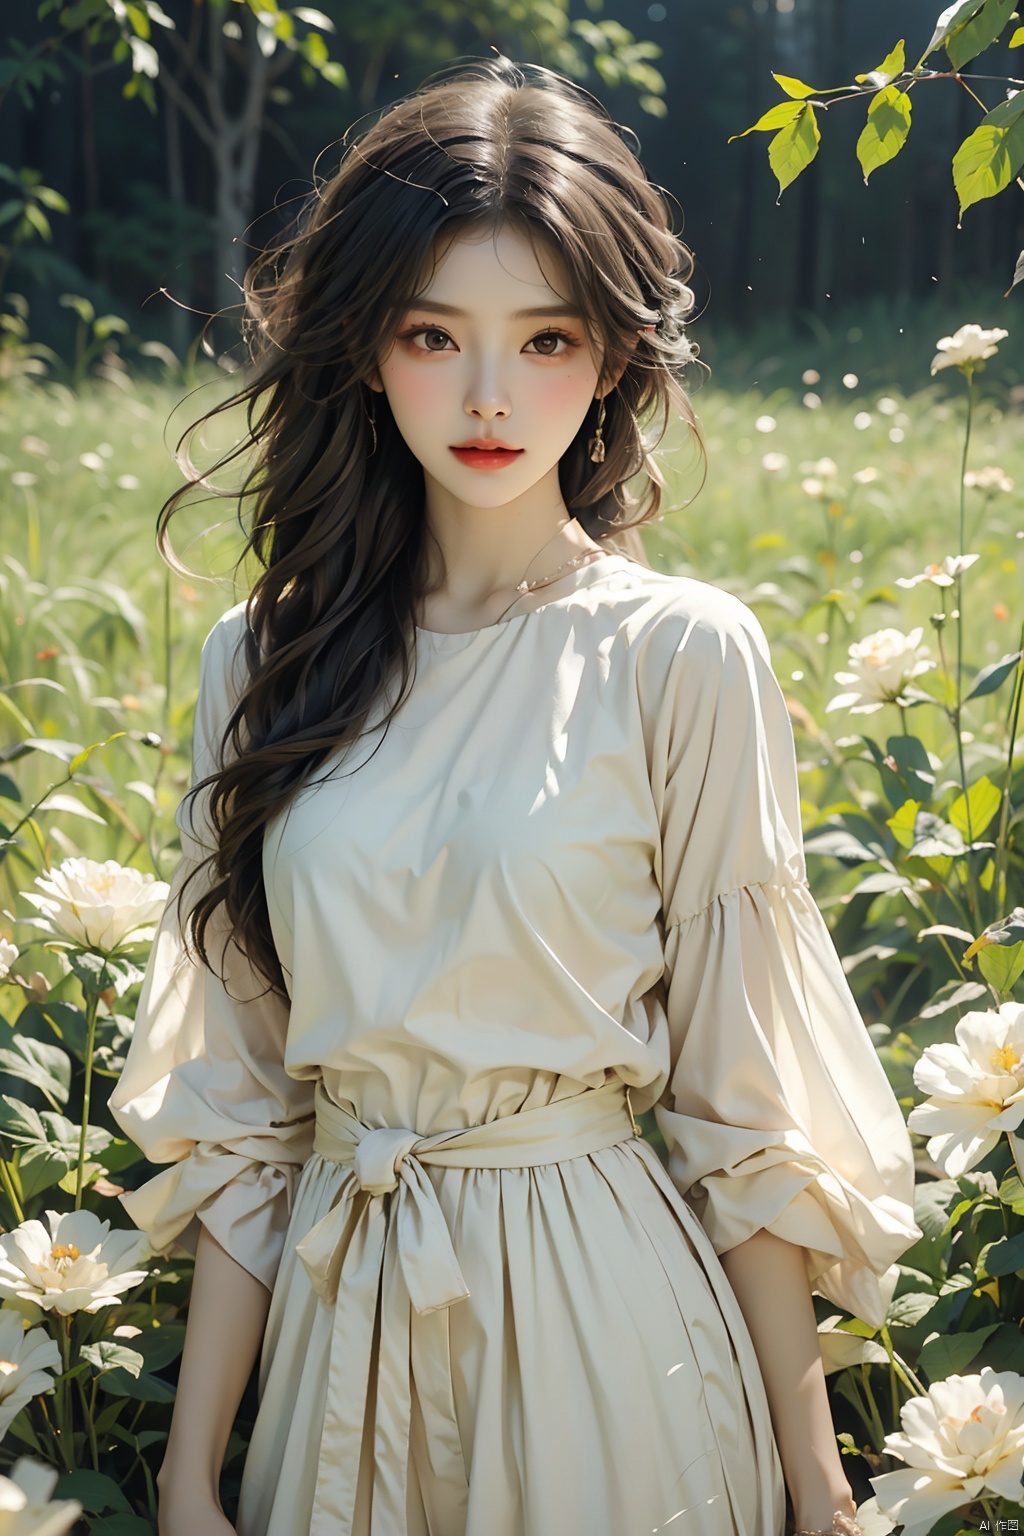  ,Masterpiece, Best quality,8K,超高分辨率,Reallightandshadow,Cinema lenses,(beautidful eyes:1.1),((中景the scene is,The upper part of the body)),dynamicposes,On a green meadow,The gentle goddess came with gentle steps。He wore a dress,A gentle breeze blows,The skirt dances lightly。The sun shone through the leaves in her hair,Reflecting her clear eyes and gentle smile。Colorful butterflies flutter around her,Flowers bloomed at her feet,It was as if nature was cheering for her。, (/qingning/), mtianmei, babata